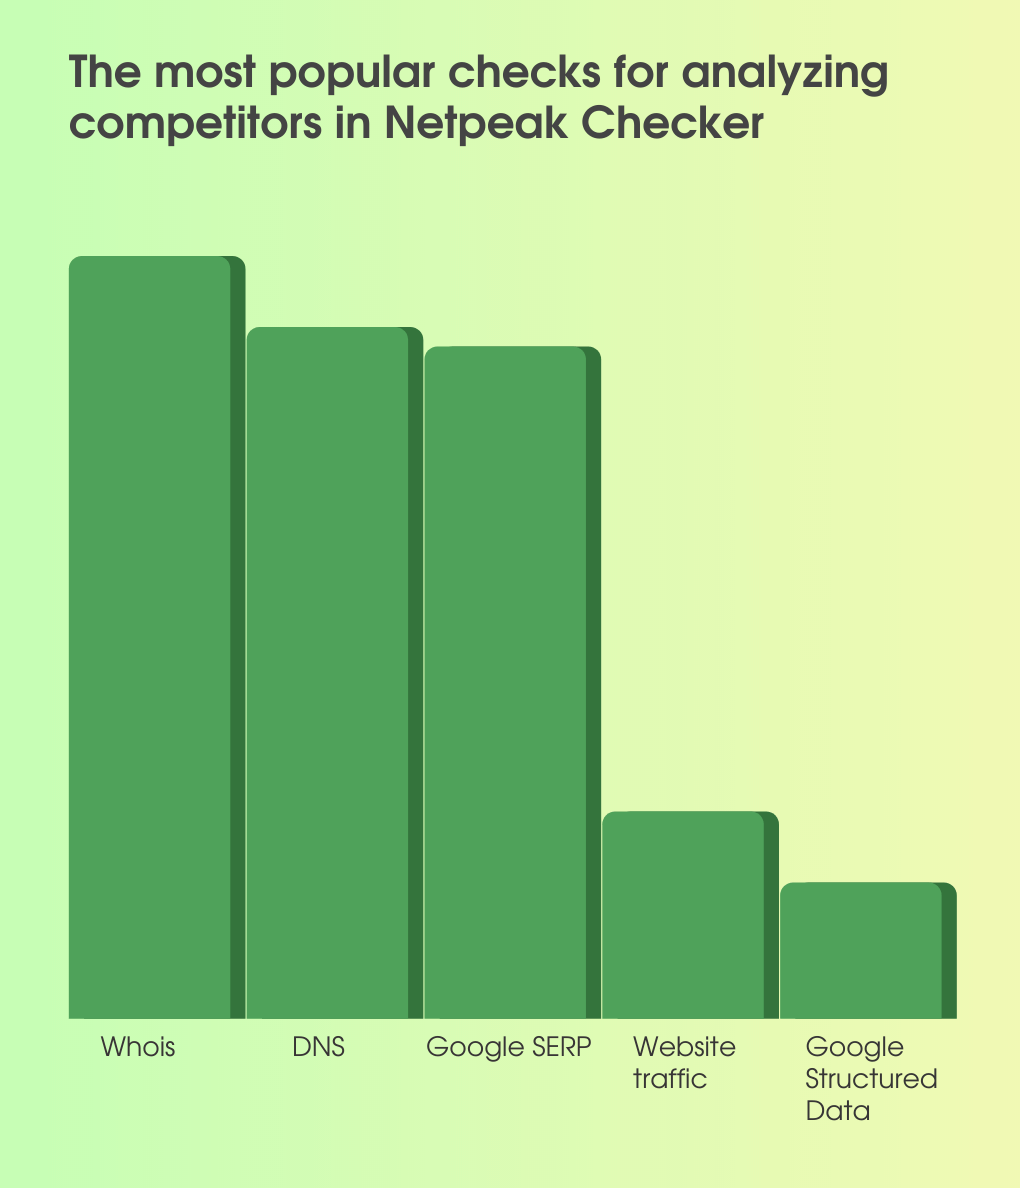 It’s clear from the diagrams that our users scrape Google search results much more often than other search systems, and Google SERP analysis is on the third spot among the most popular features in Netpeak Checker